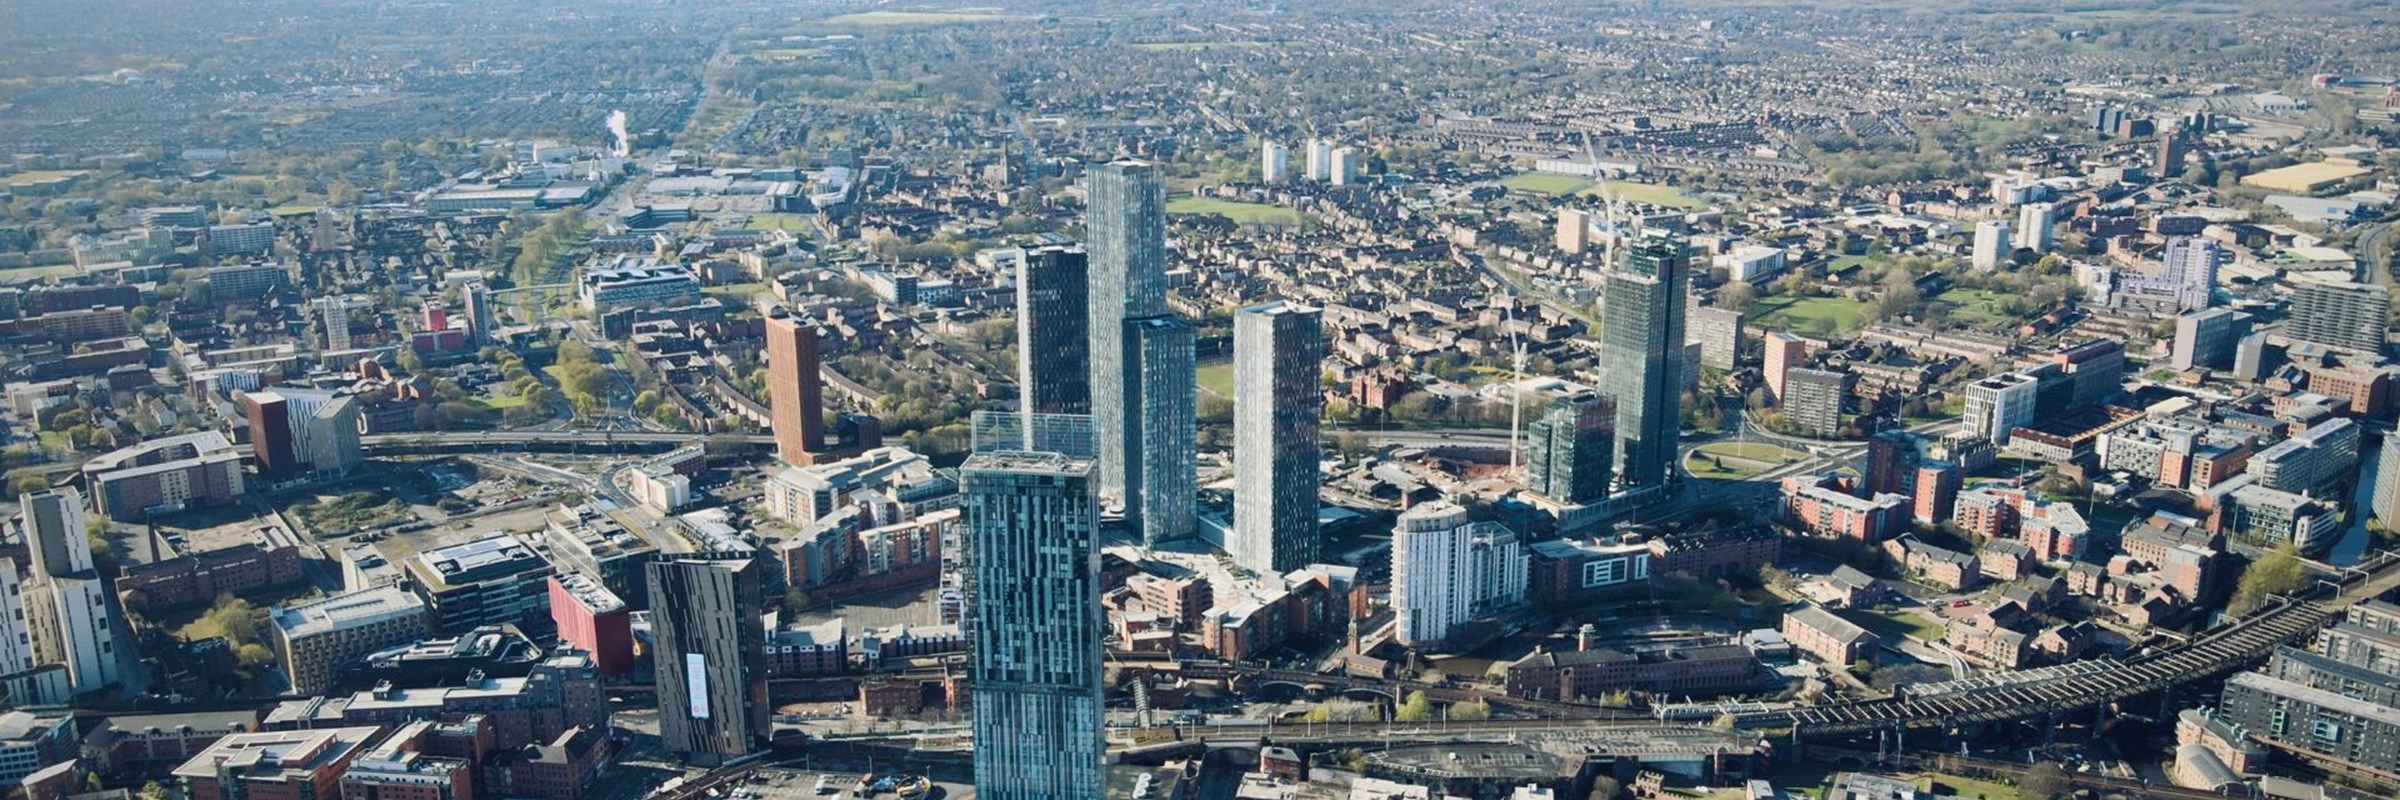 an aerial view of the city of Manchester